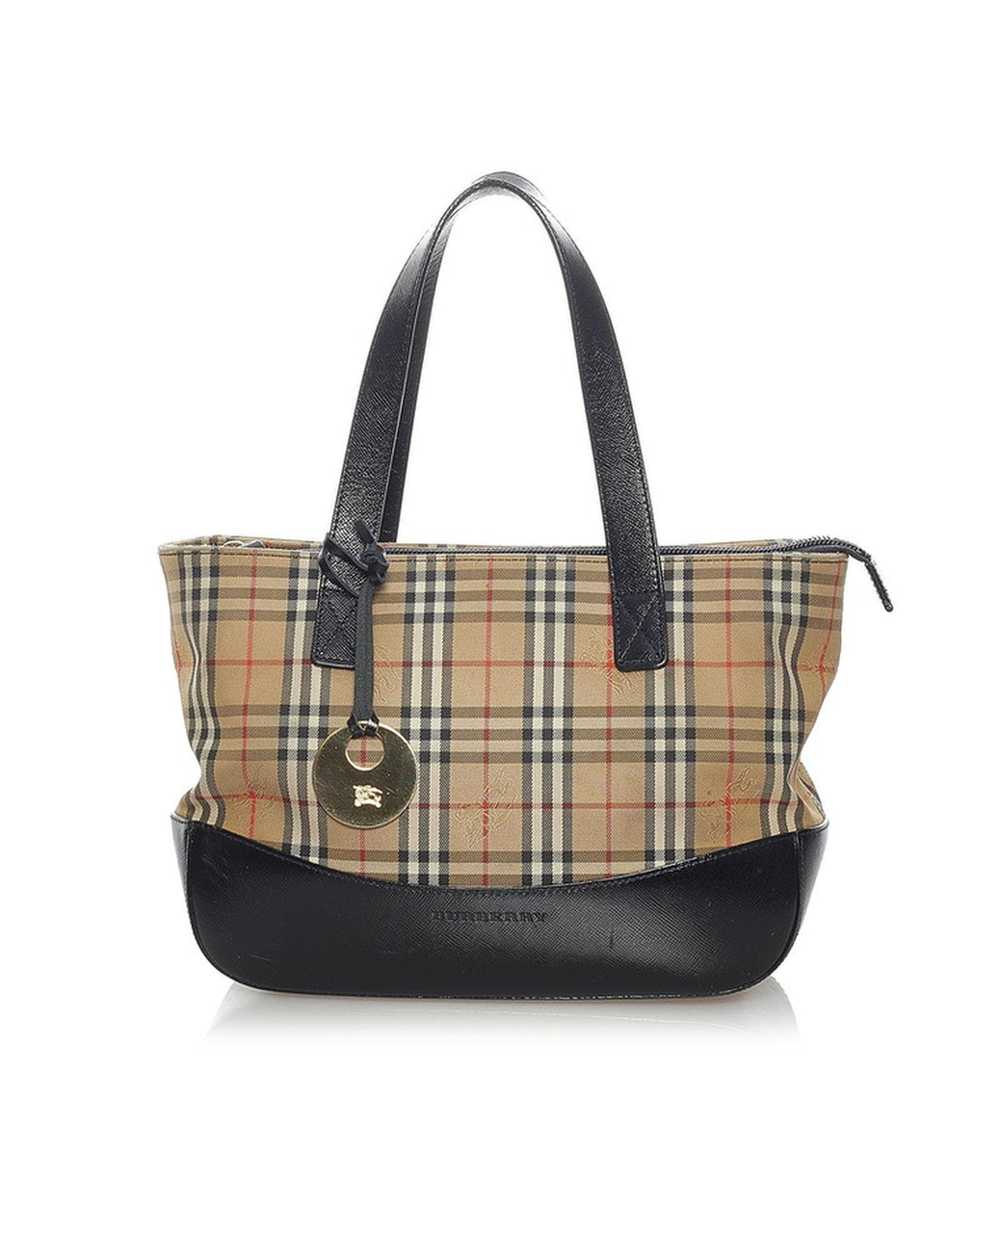 Burberry Classic Check Handbag in Brown - image 1